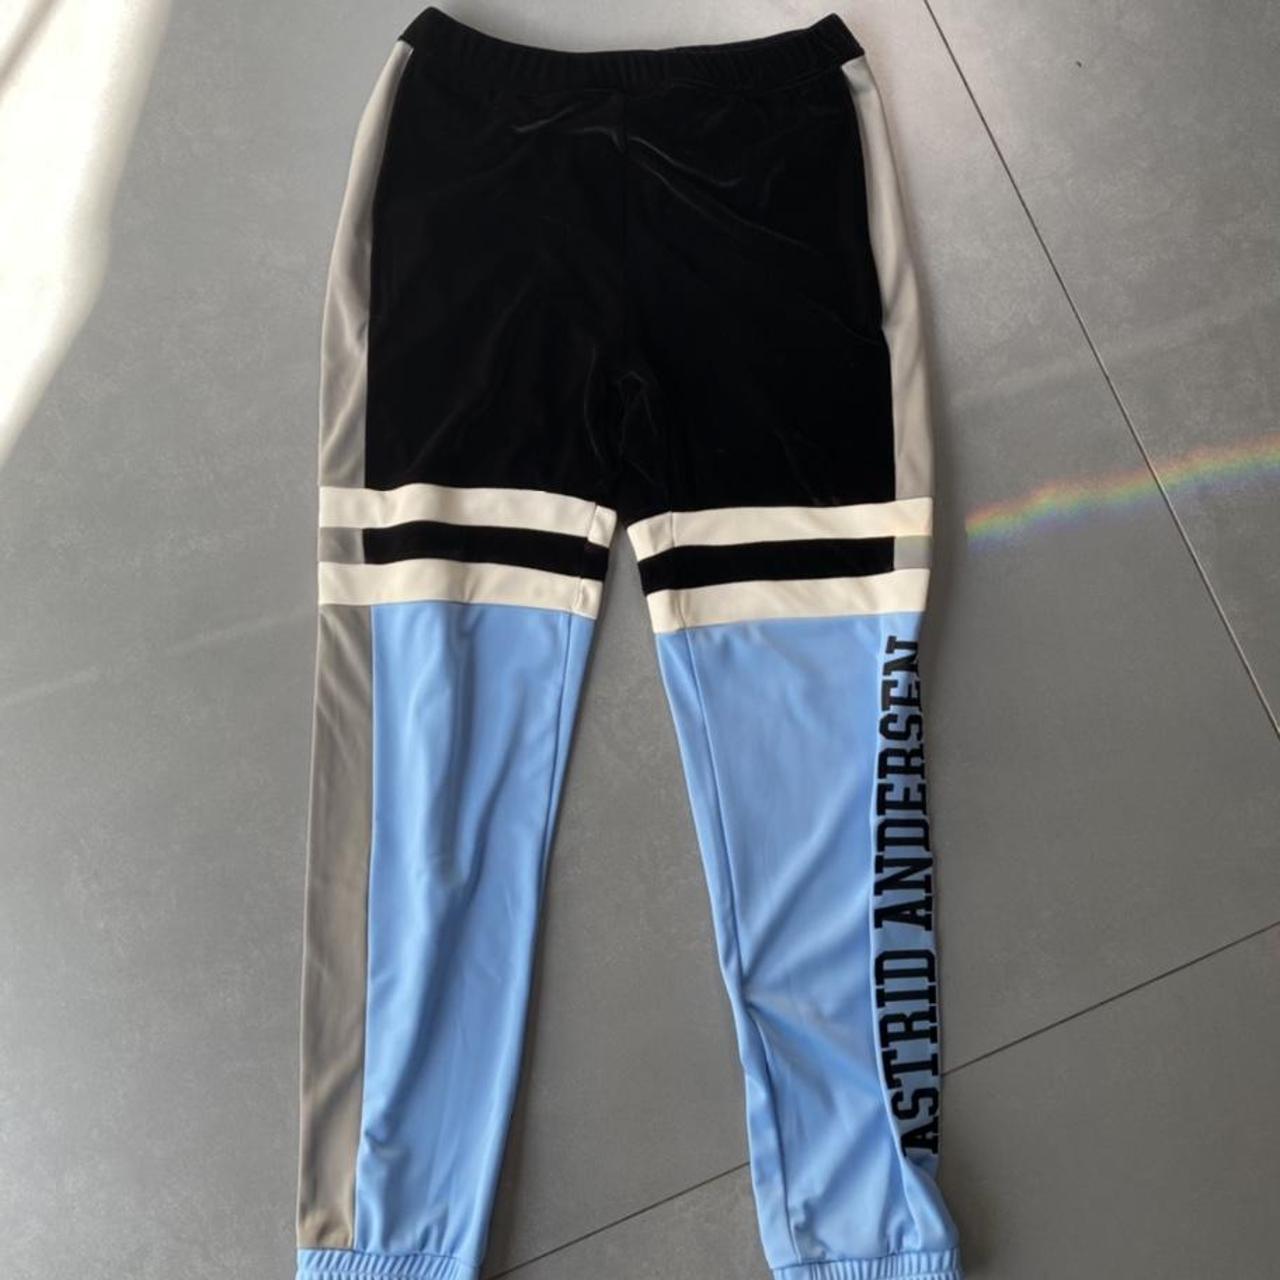 Astrid Andersen Men's Black and Blue Joggers-tracksuits